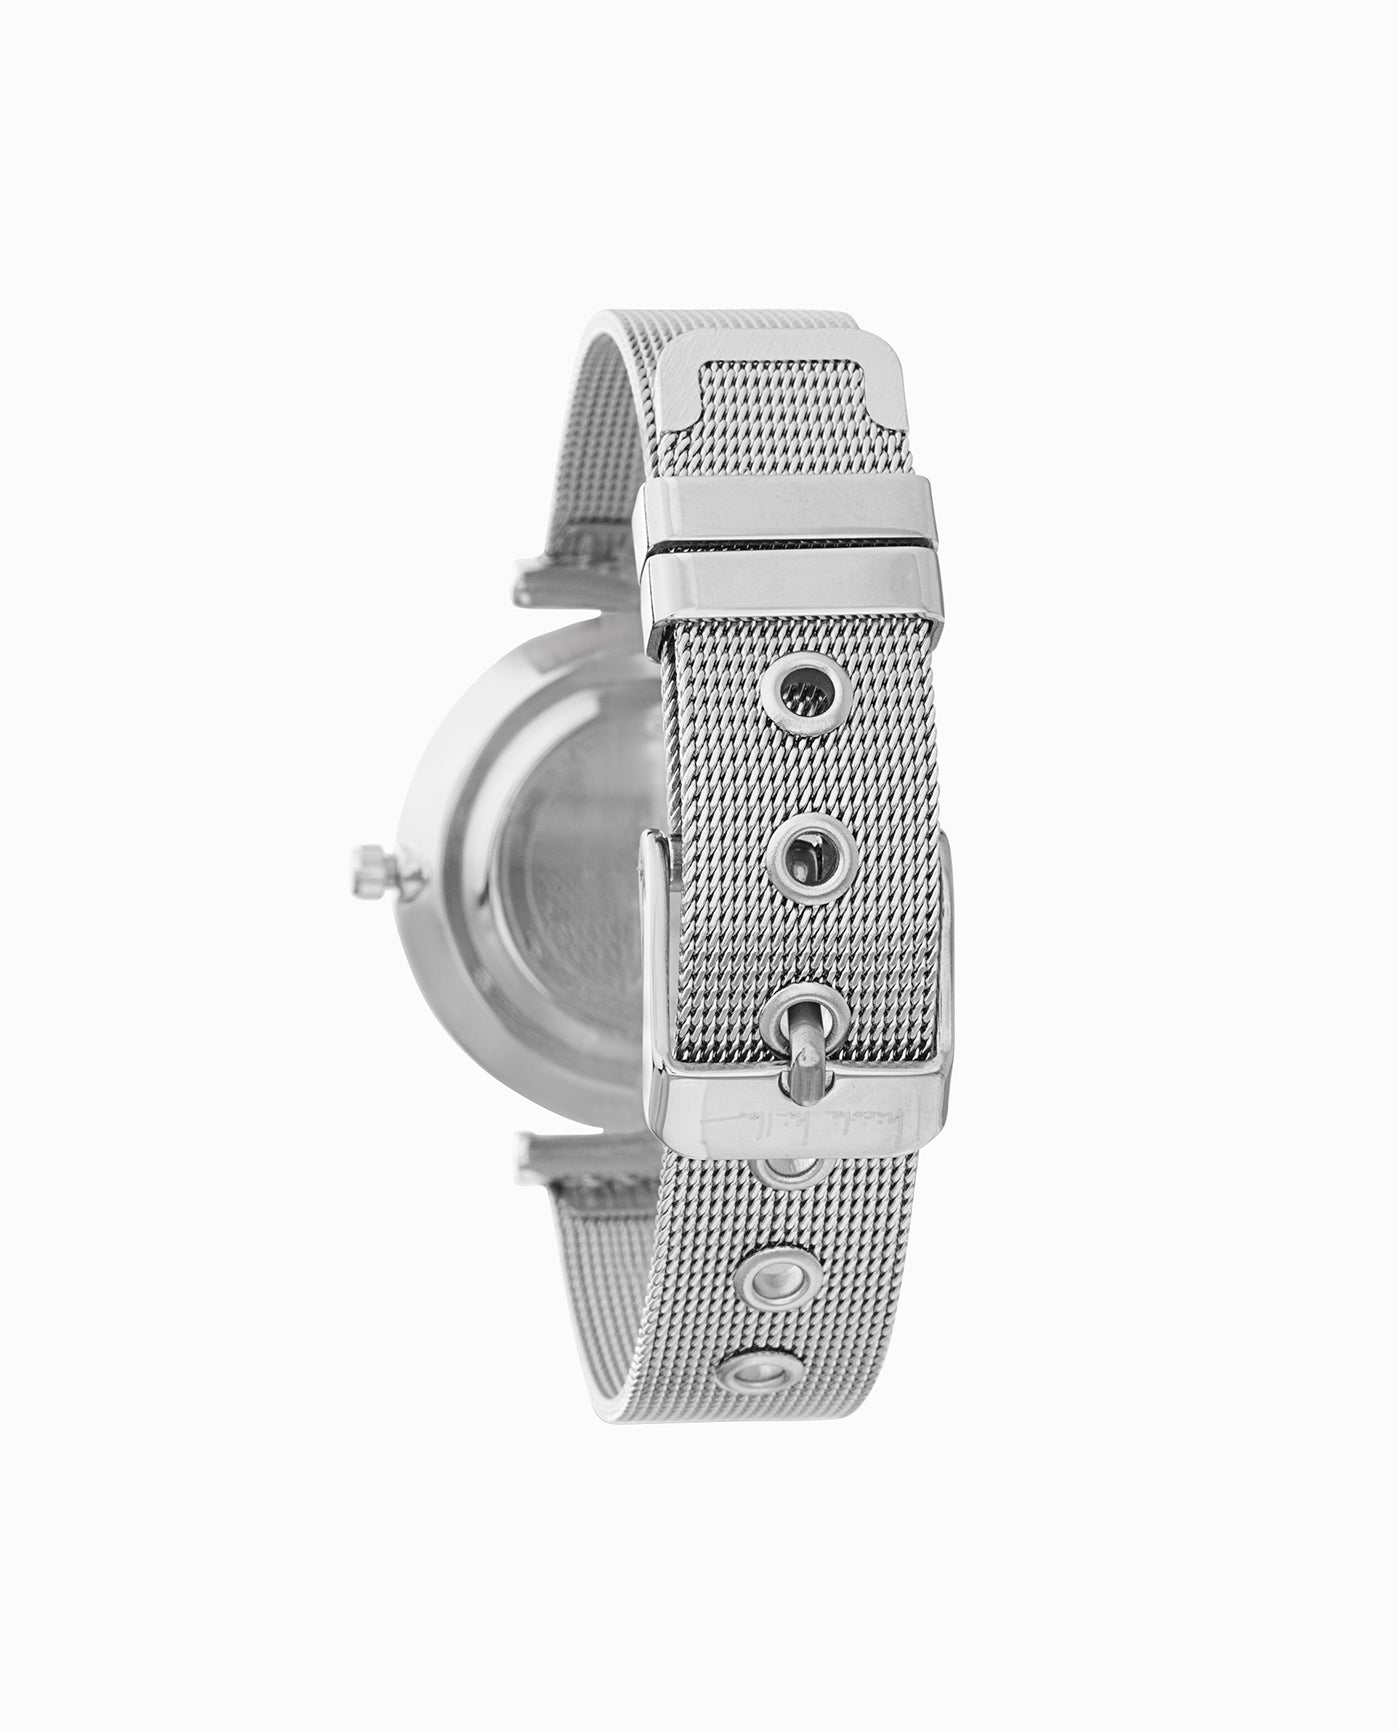 SNAKE/SILVER TONE STAINLESS STEEL STRAP WATCH, 32mm BAND CLOSE UP | Silver And Snake